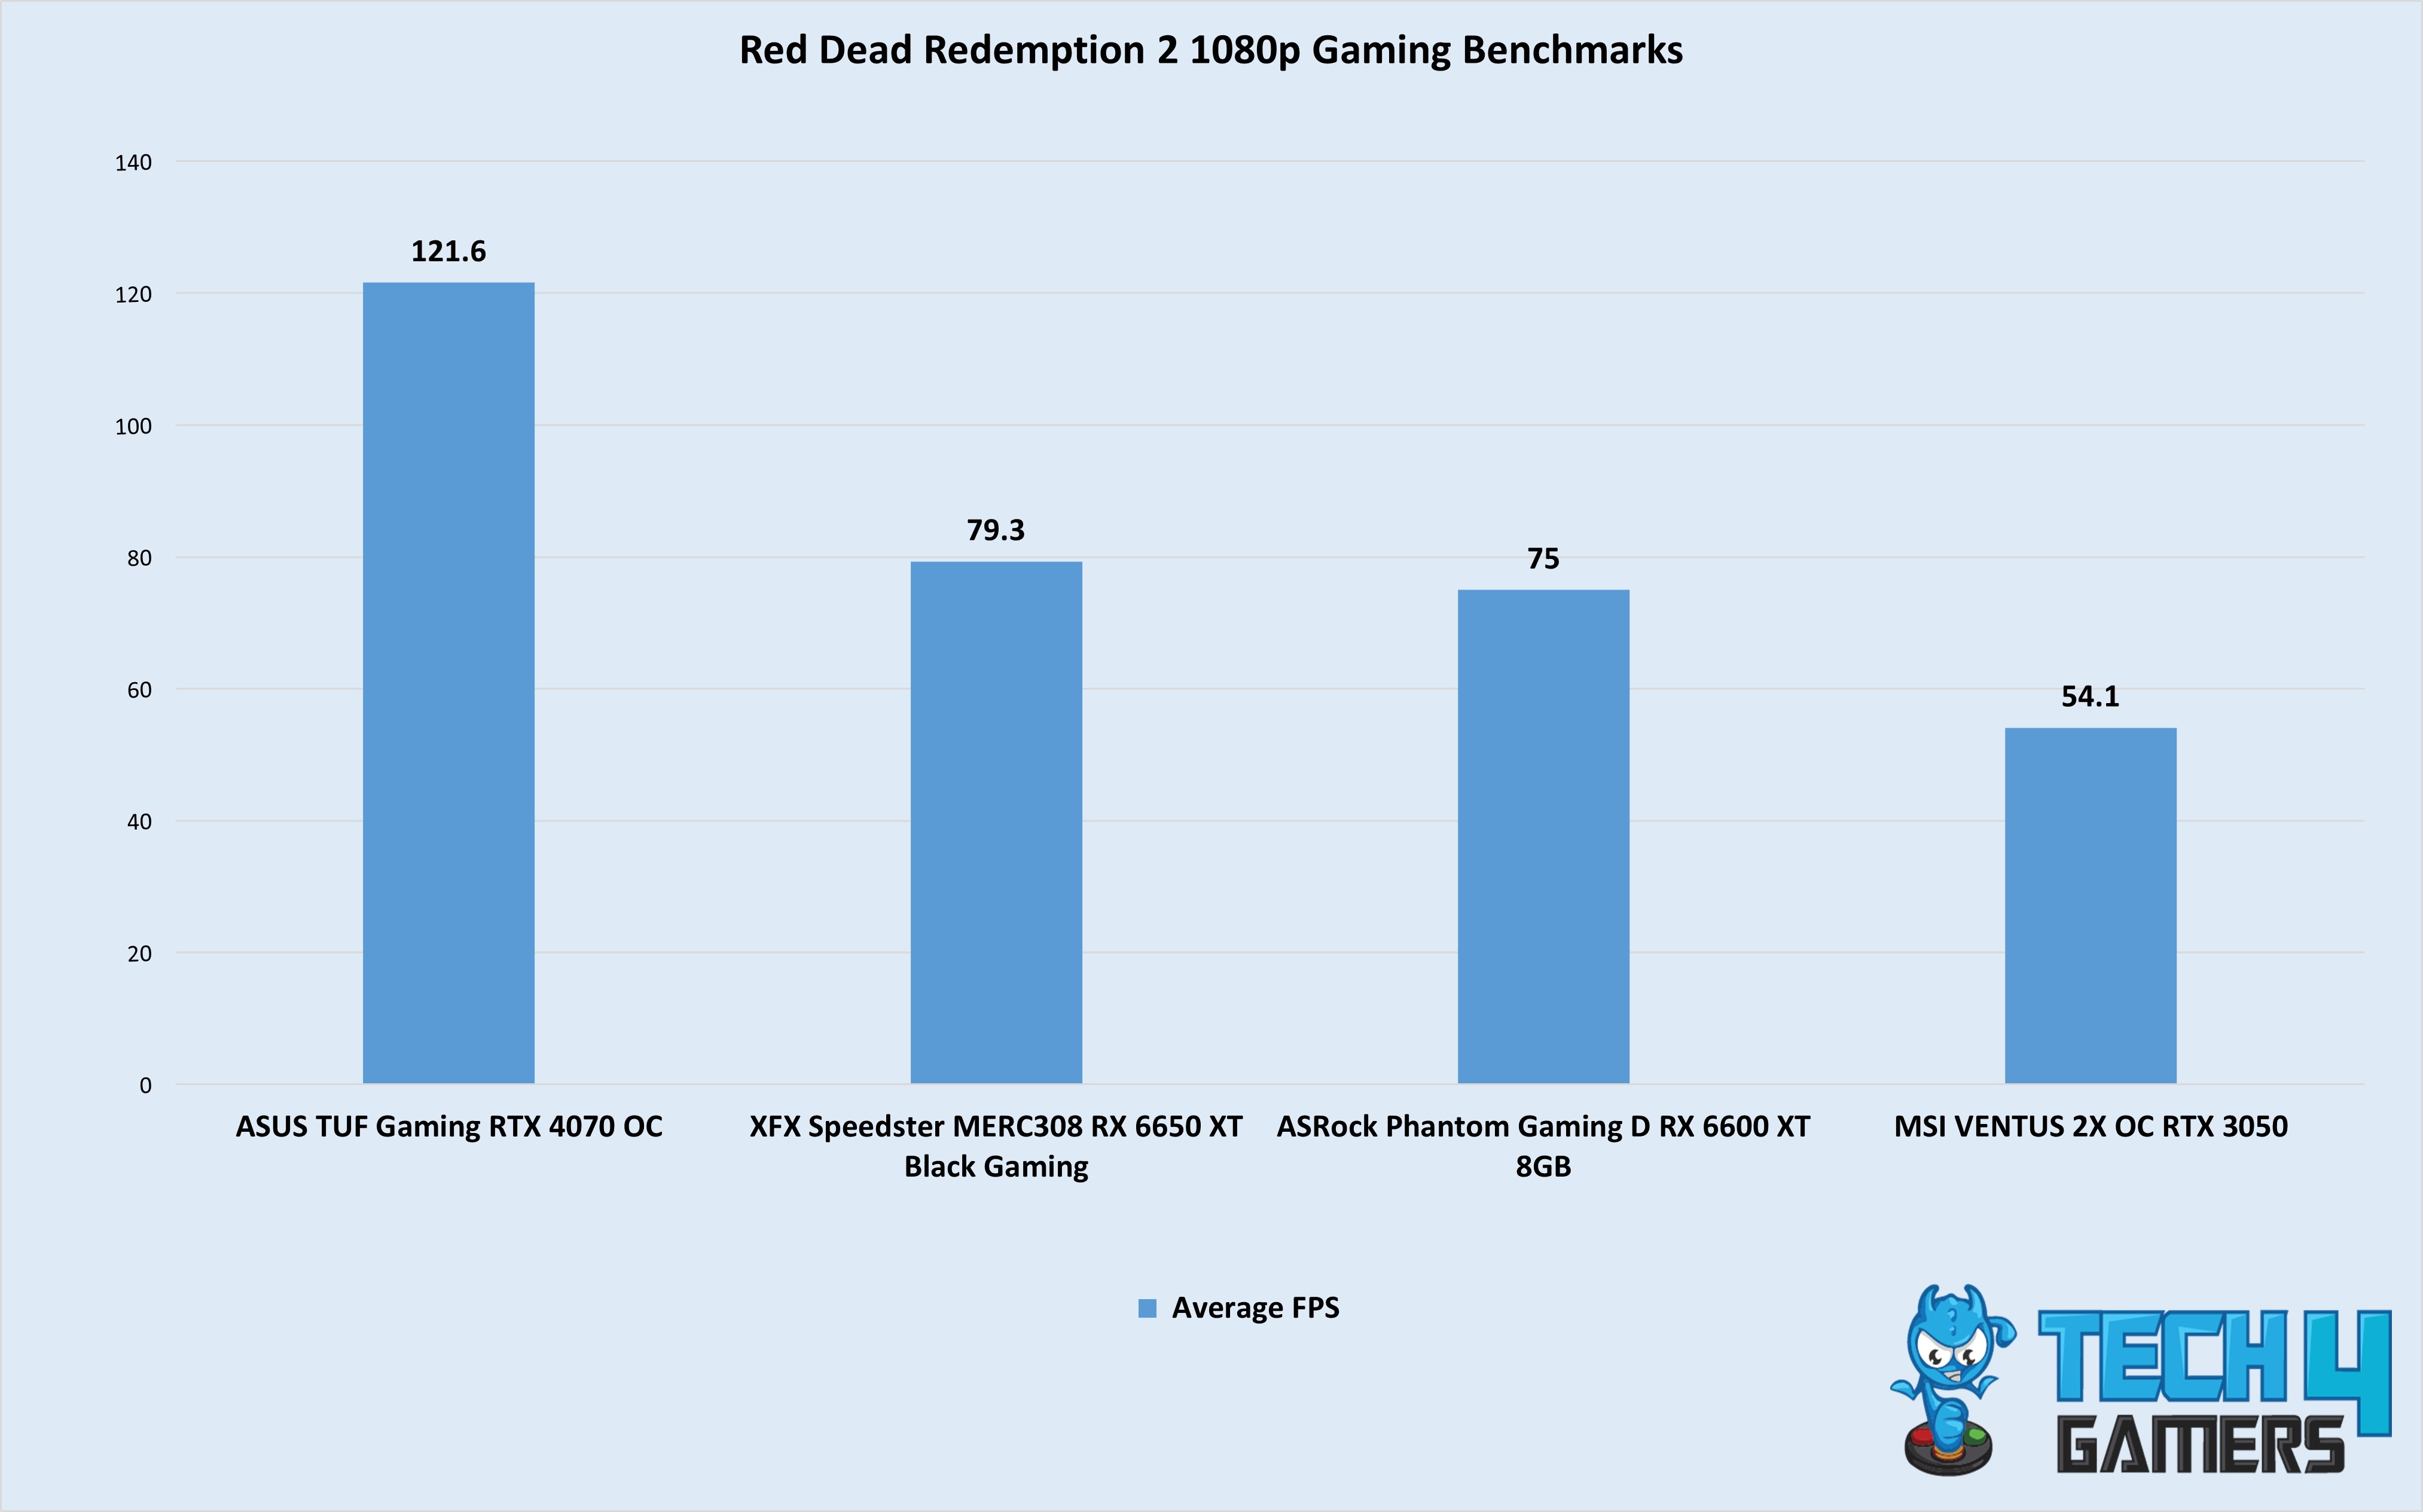 Red Dead Redemption 2 1080p Gaming Benchmarks